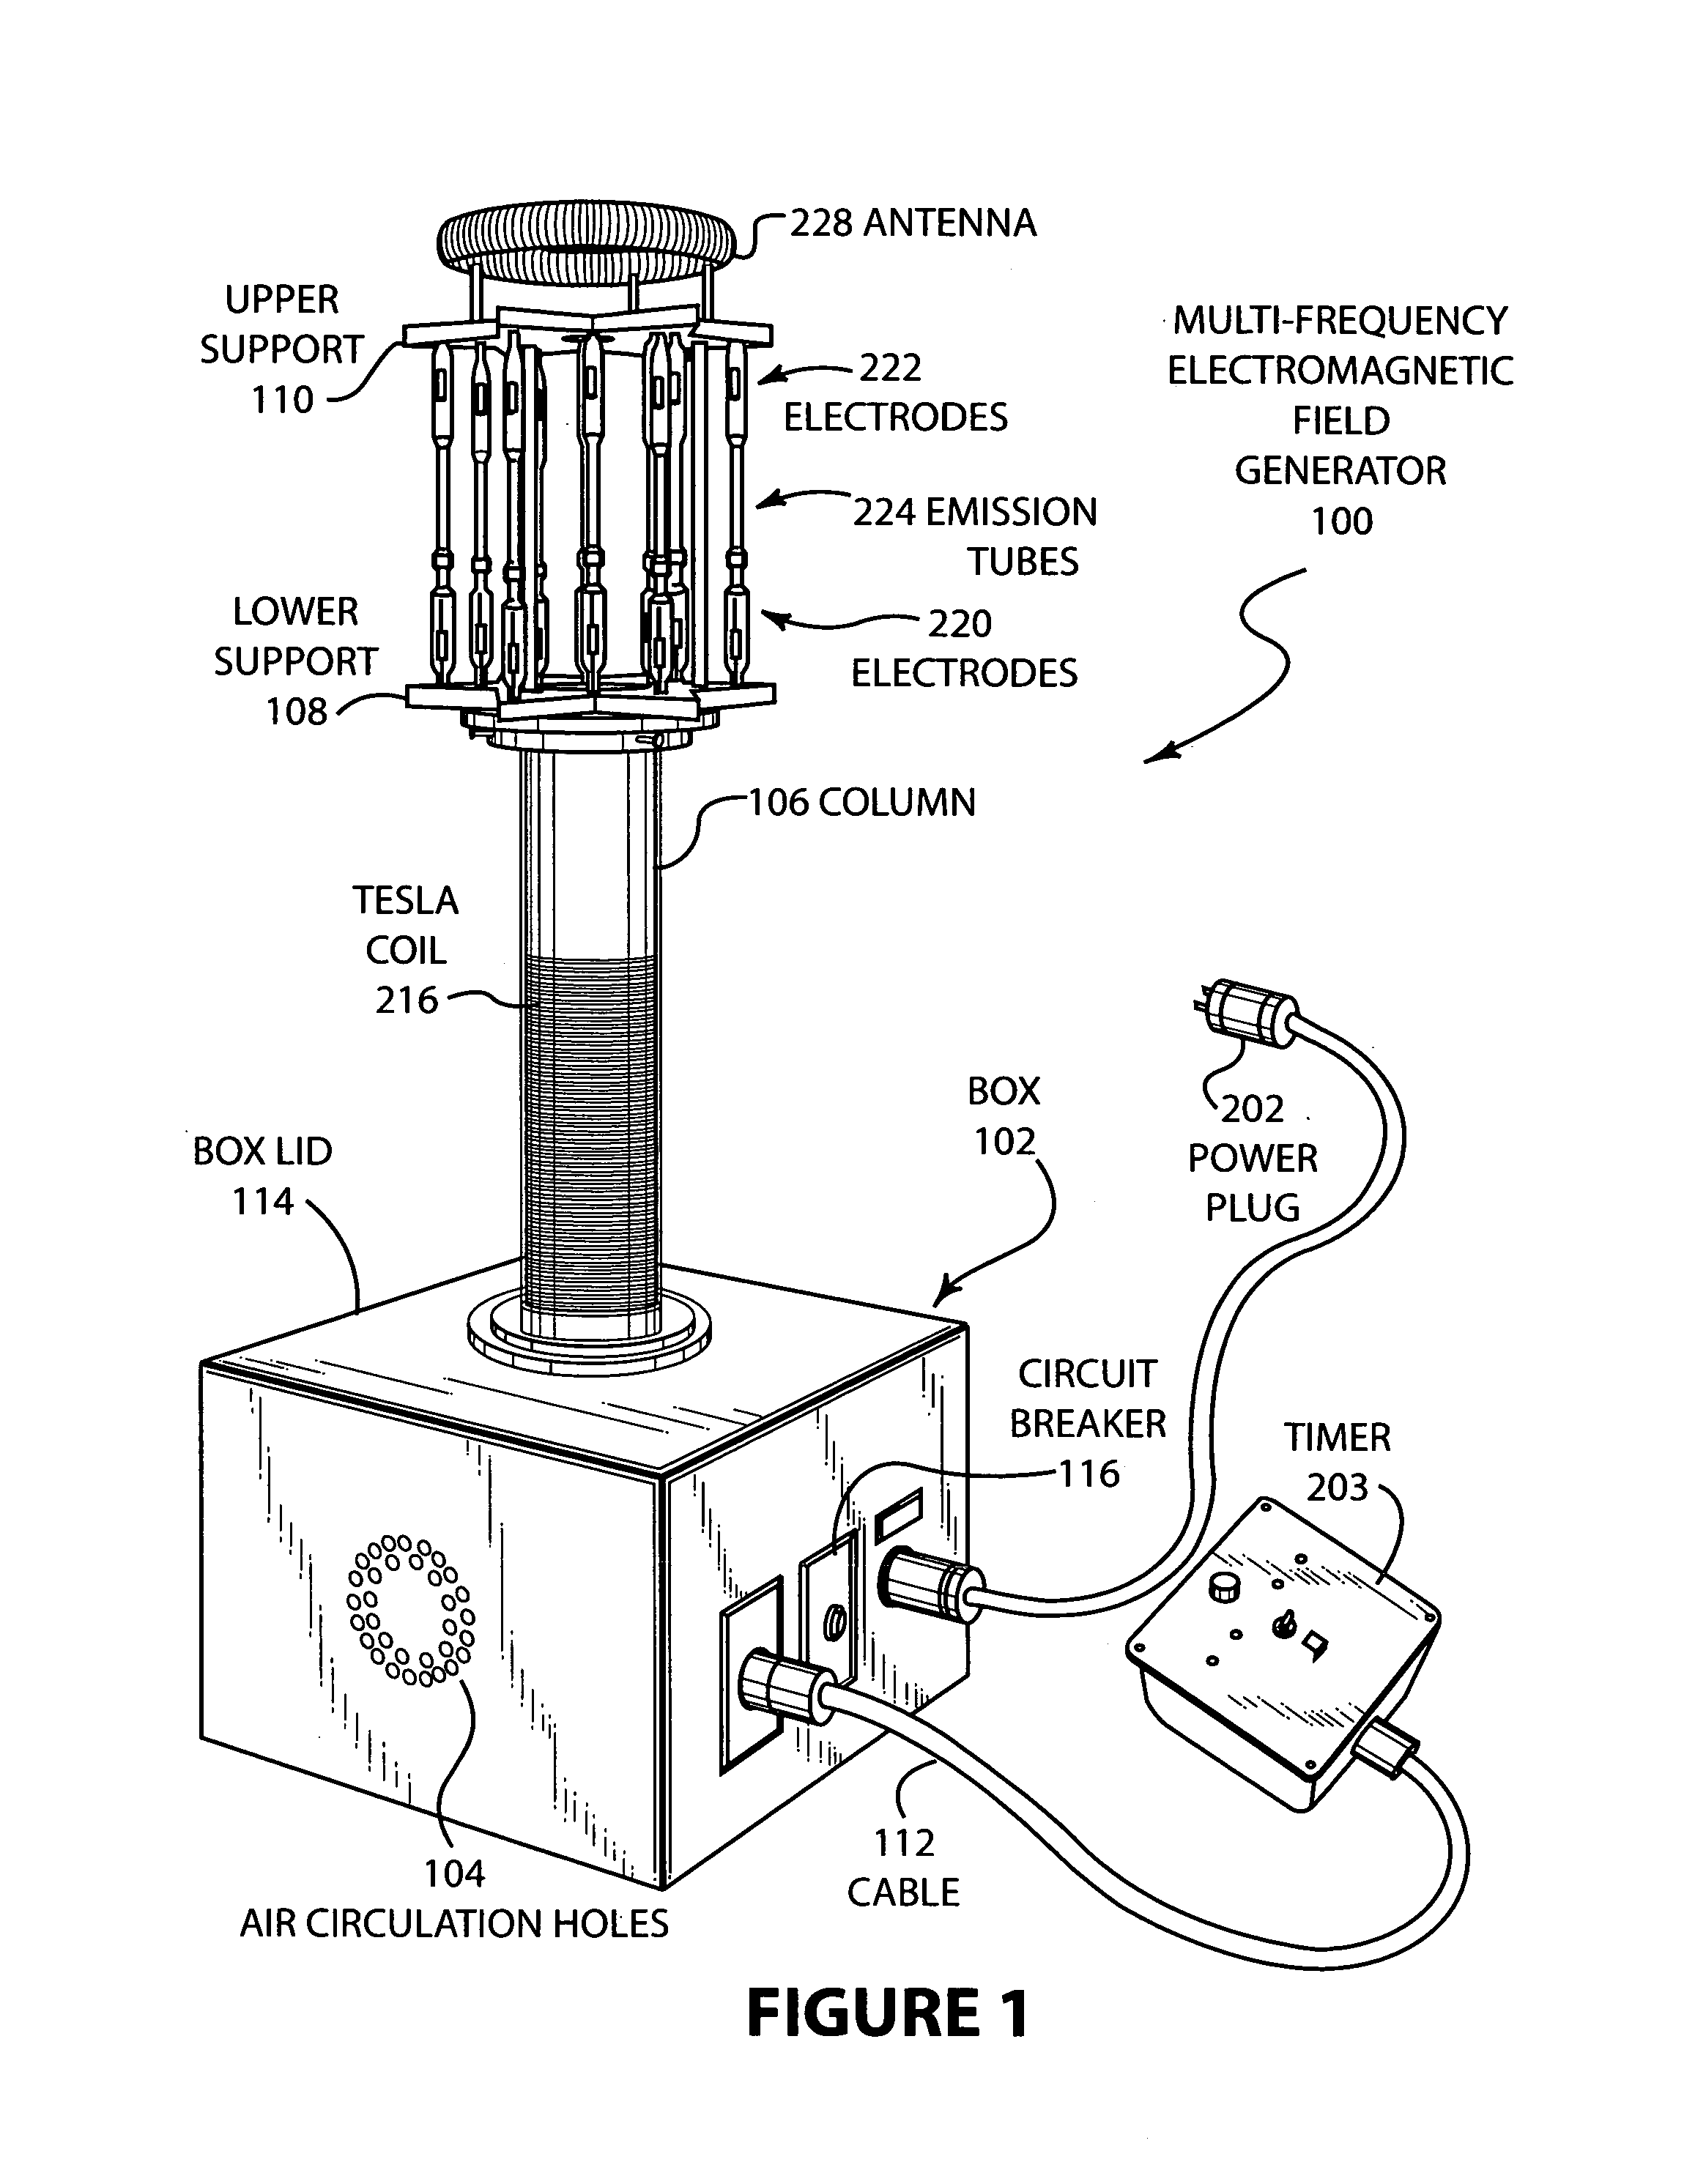 Multifrequency electro-magnetic field generator